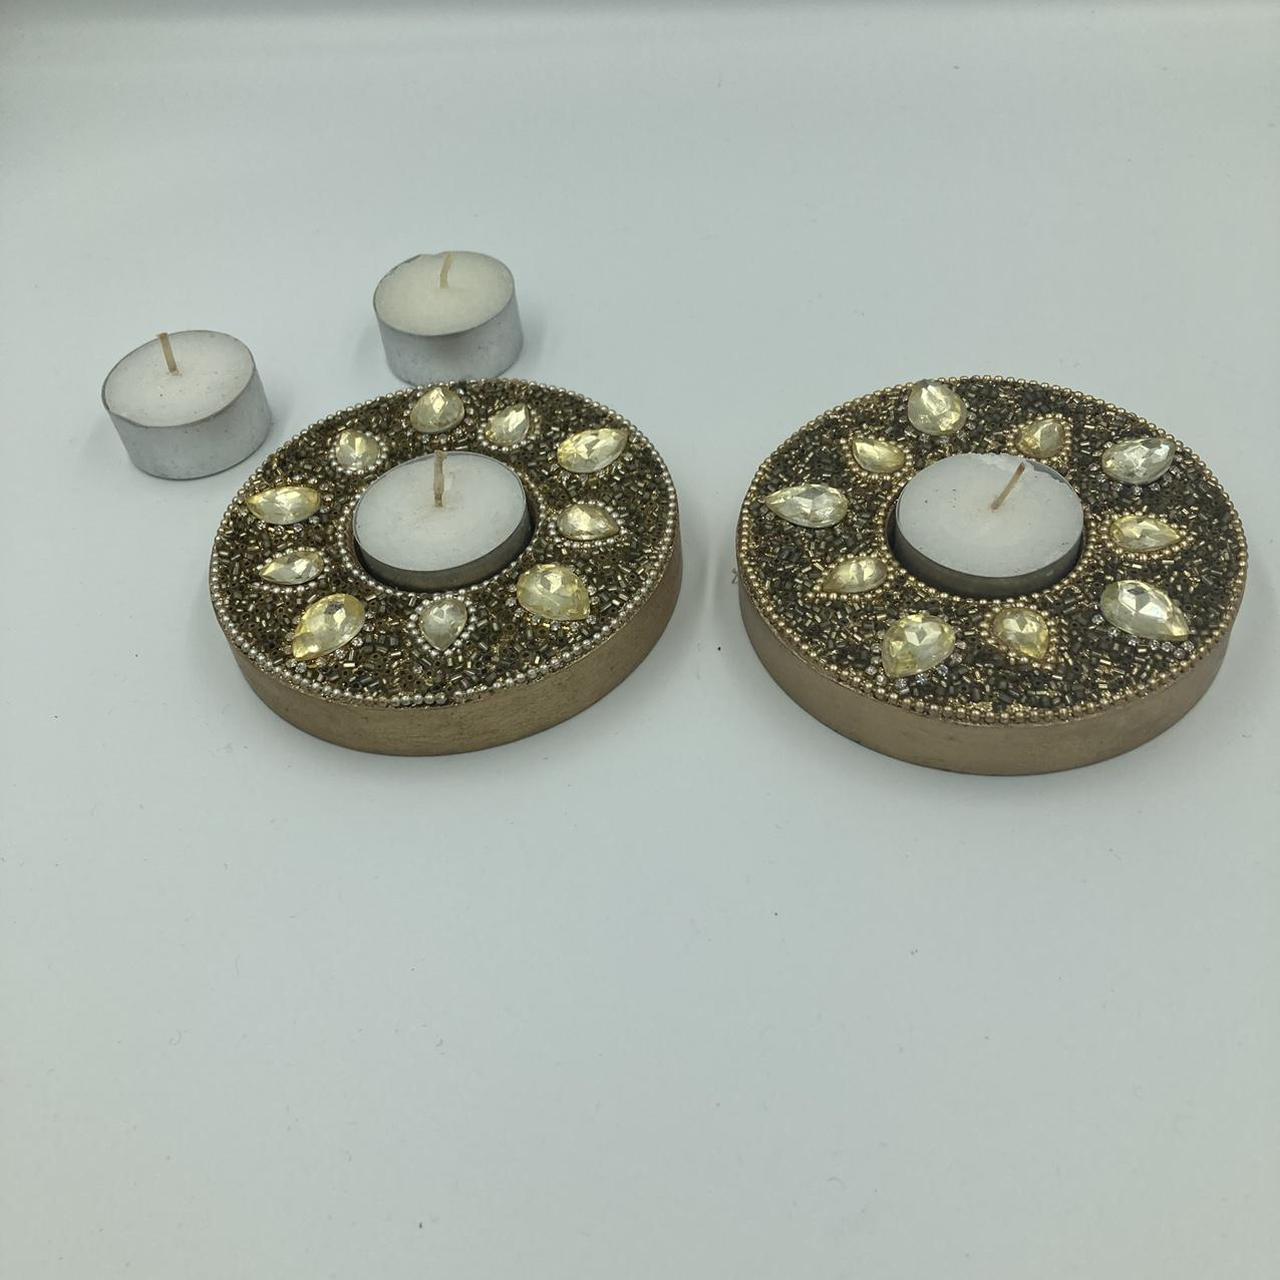 Product Image 1 - #Pier1 tea #candle holders set